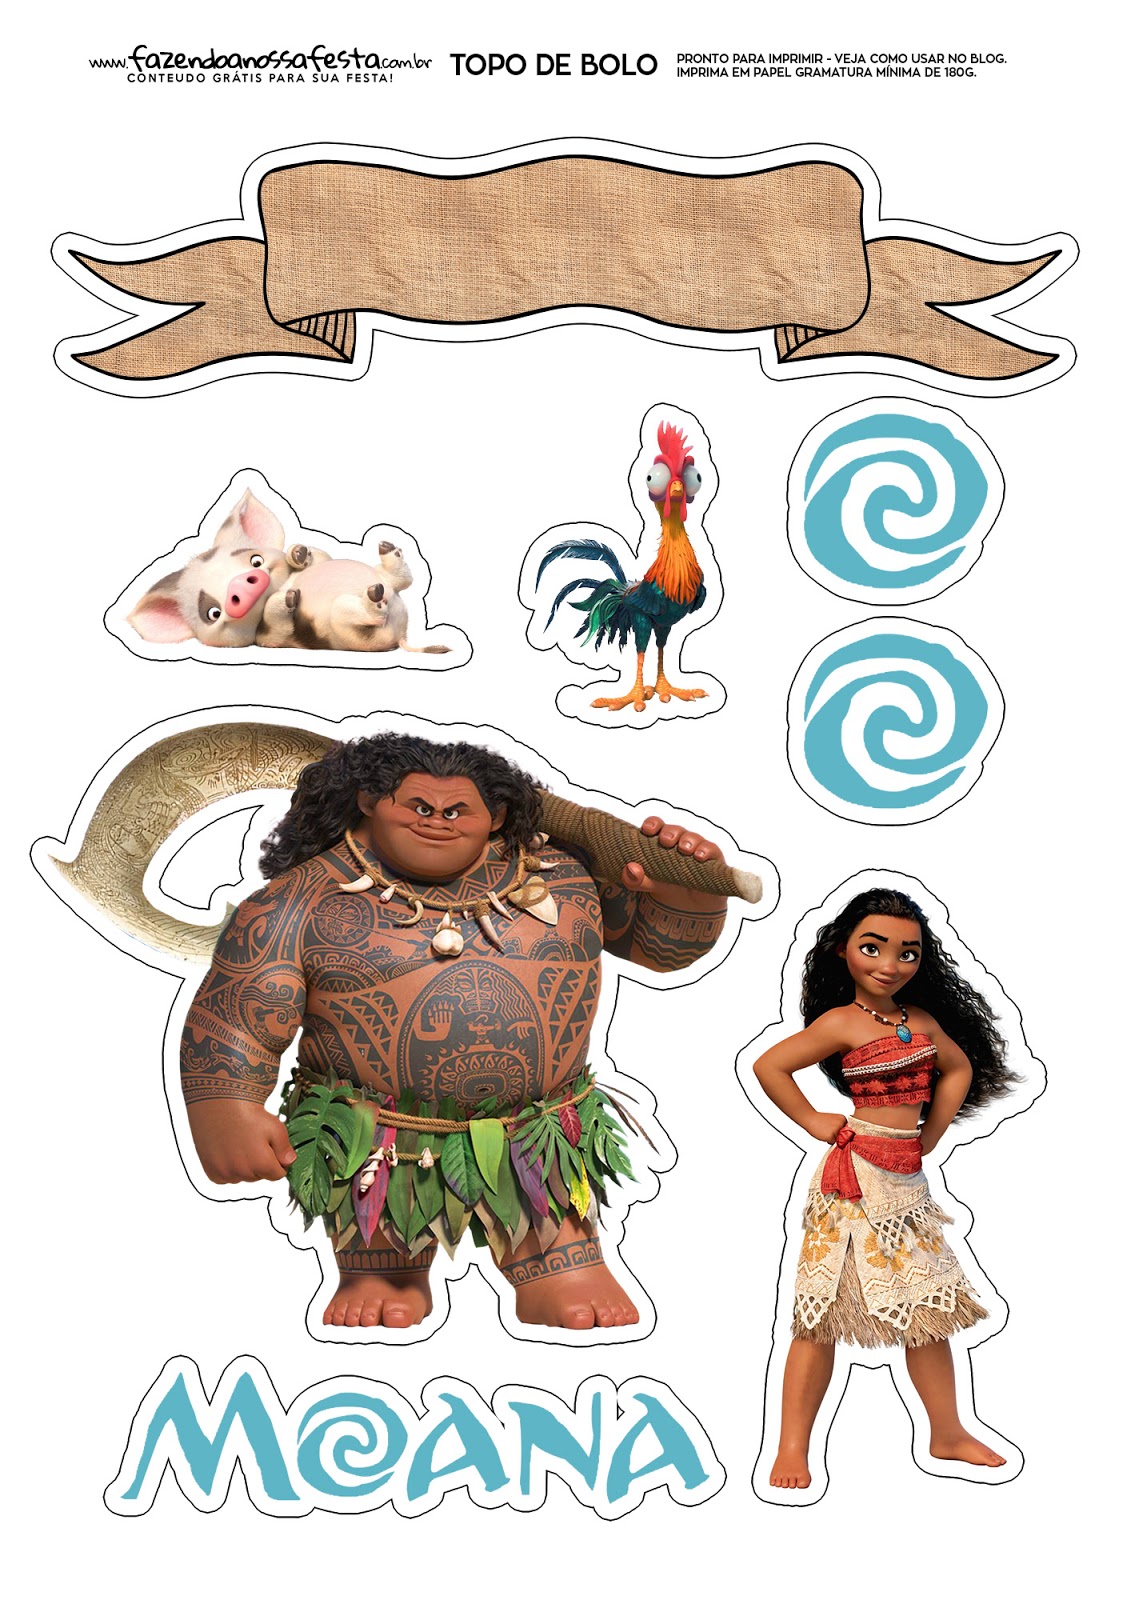 Moana Free Printable Cake Toppers. Oh My Fiesta! in english